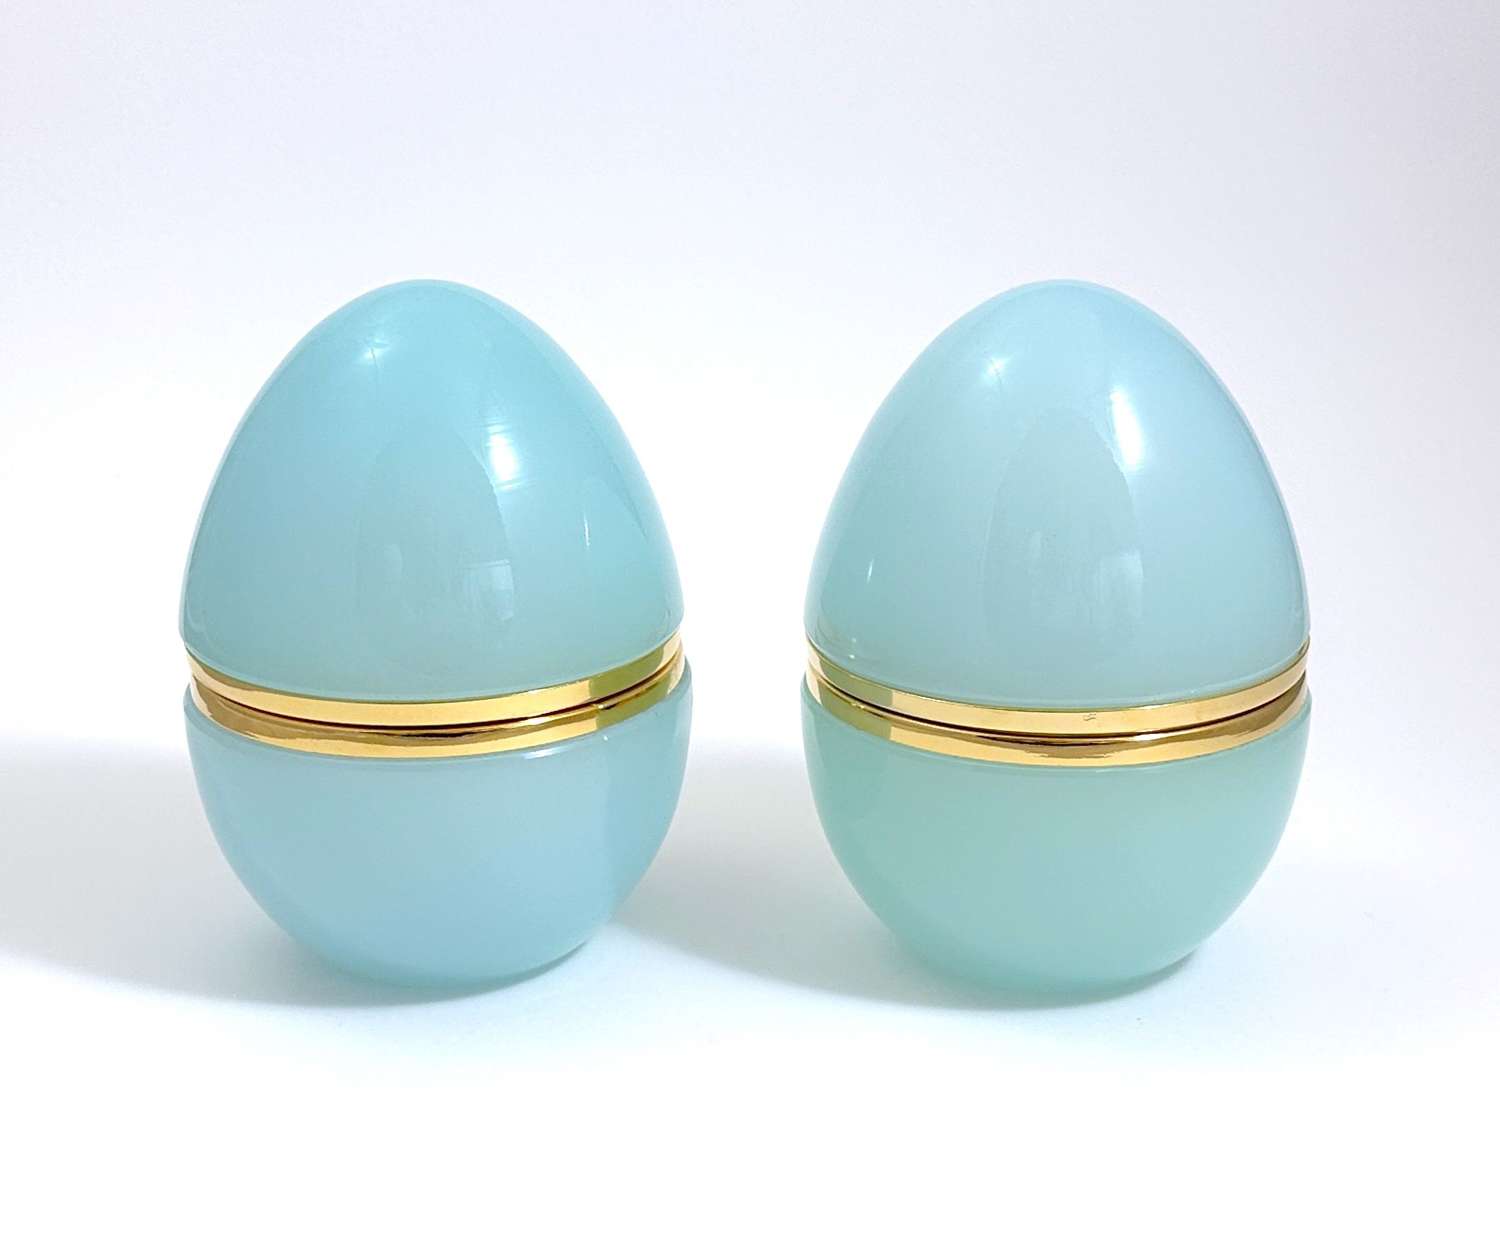 Large Pair of Antique Murano Pale Blue Opaline Glass Egg Shaped Boxes